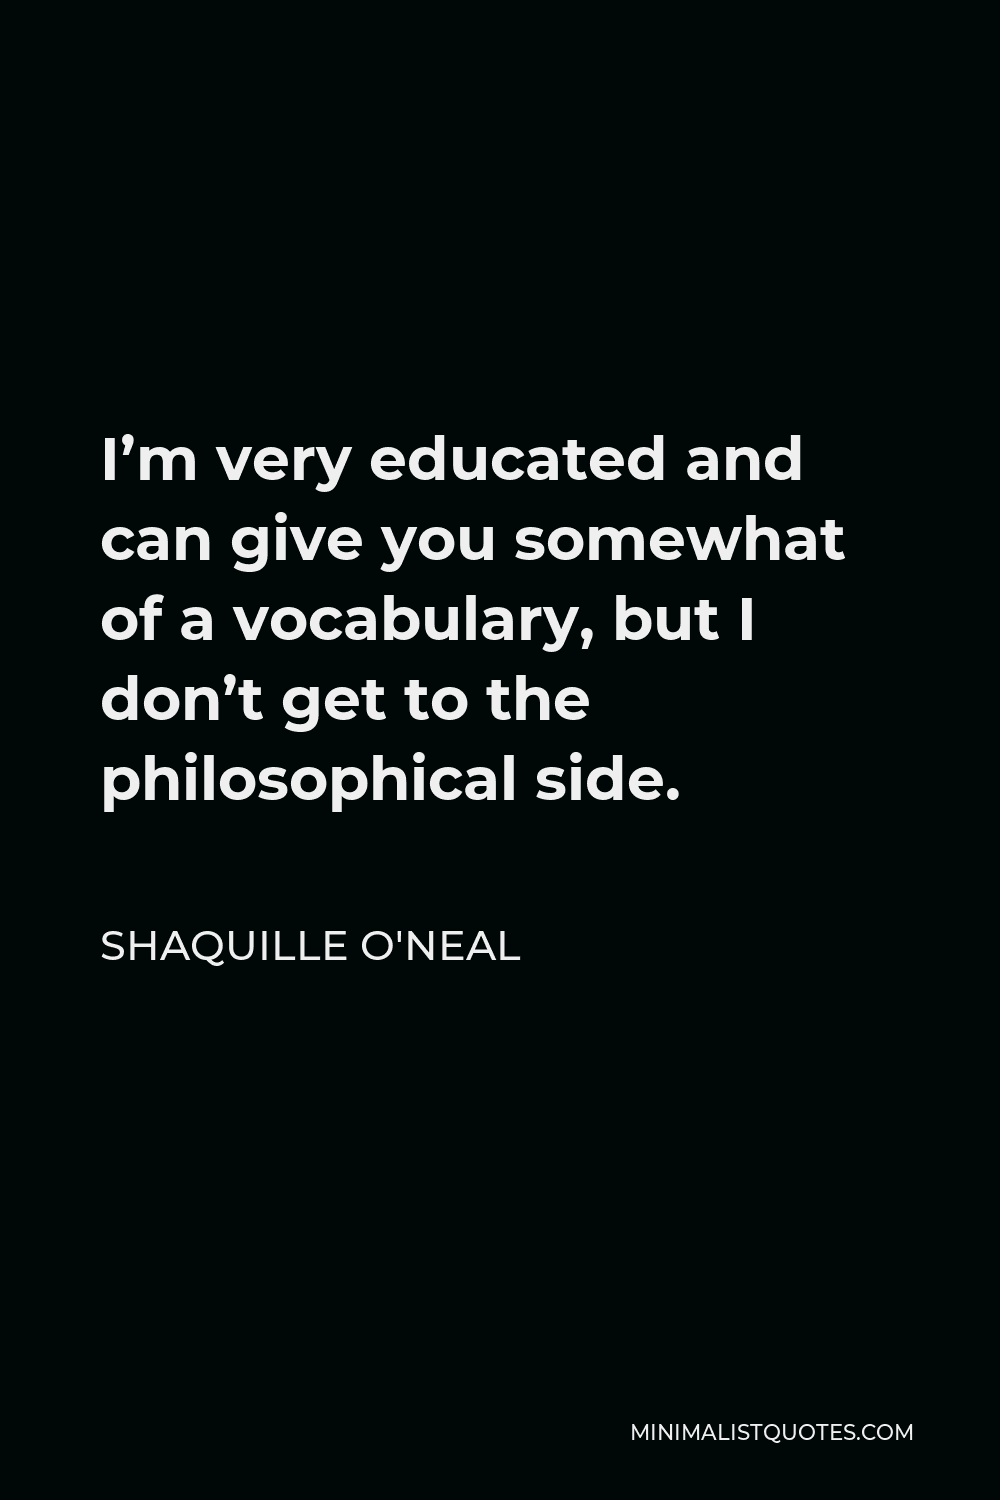 Shaquille O'Neal Quote - I’m very educated and can give you somewhat of a vocabulary, but I don’t get to the philosophical side.